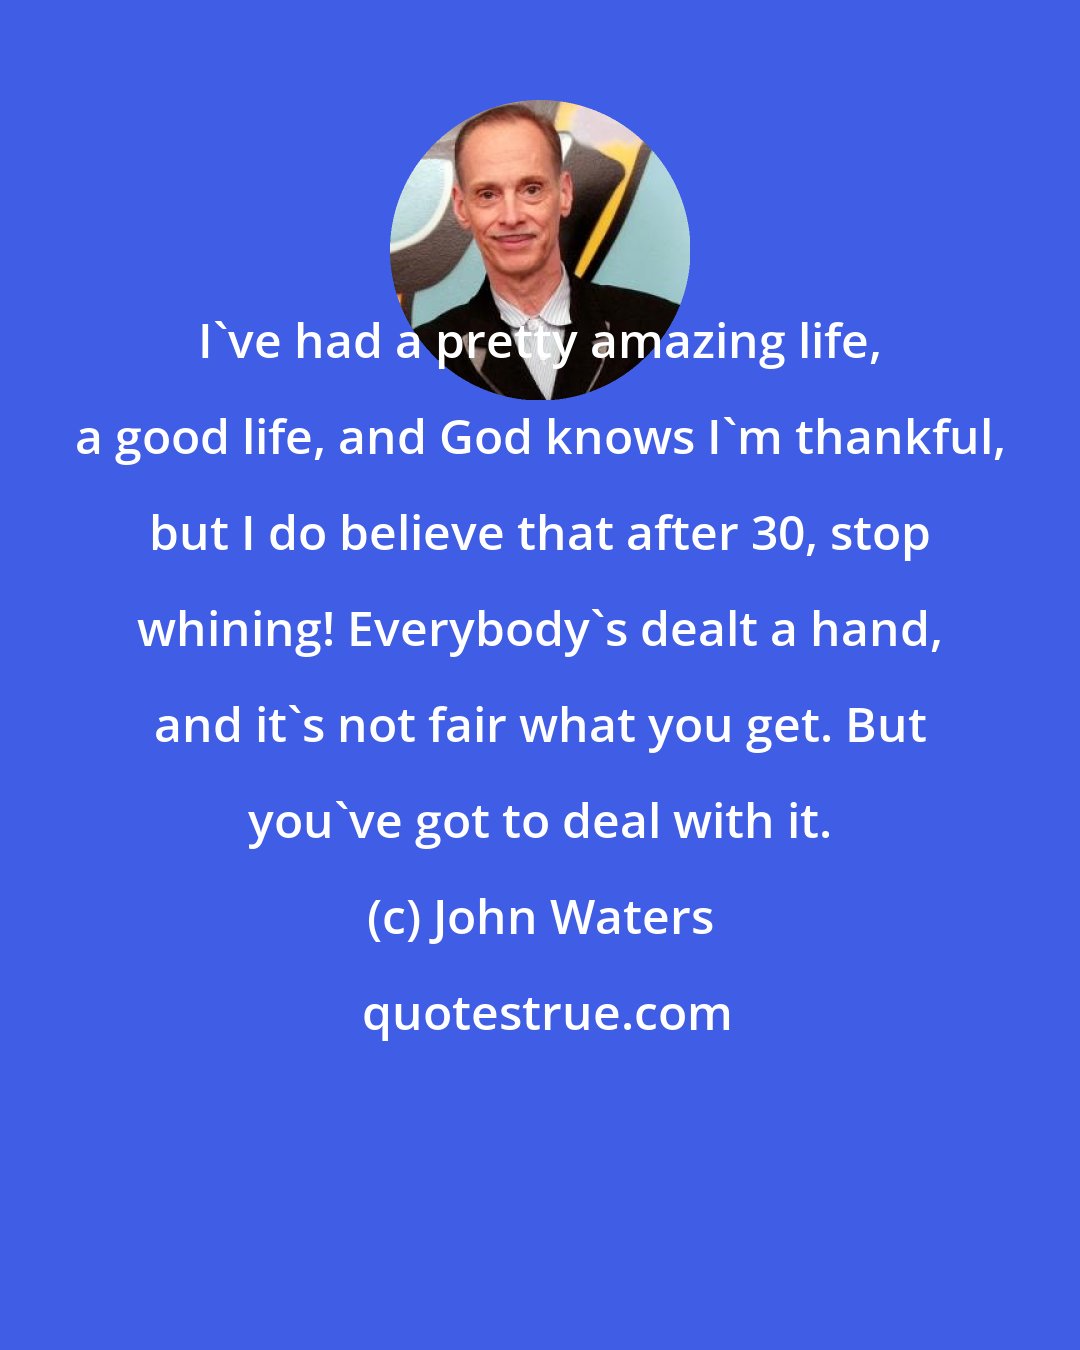 John Waters: I've had a pretty amazing life, a good life, and God knows I'm thankful, but I do believe that after 30, stop whining! Everybody's dealt a hand, and it's not fair what you get. But you've got to deal with it.